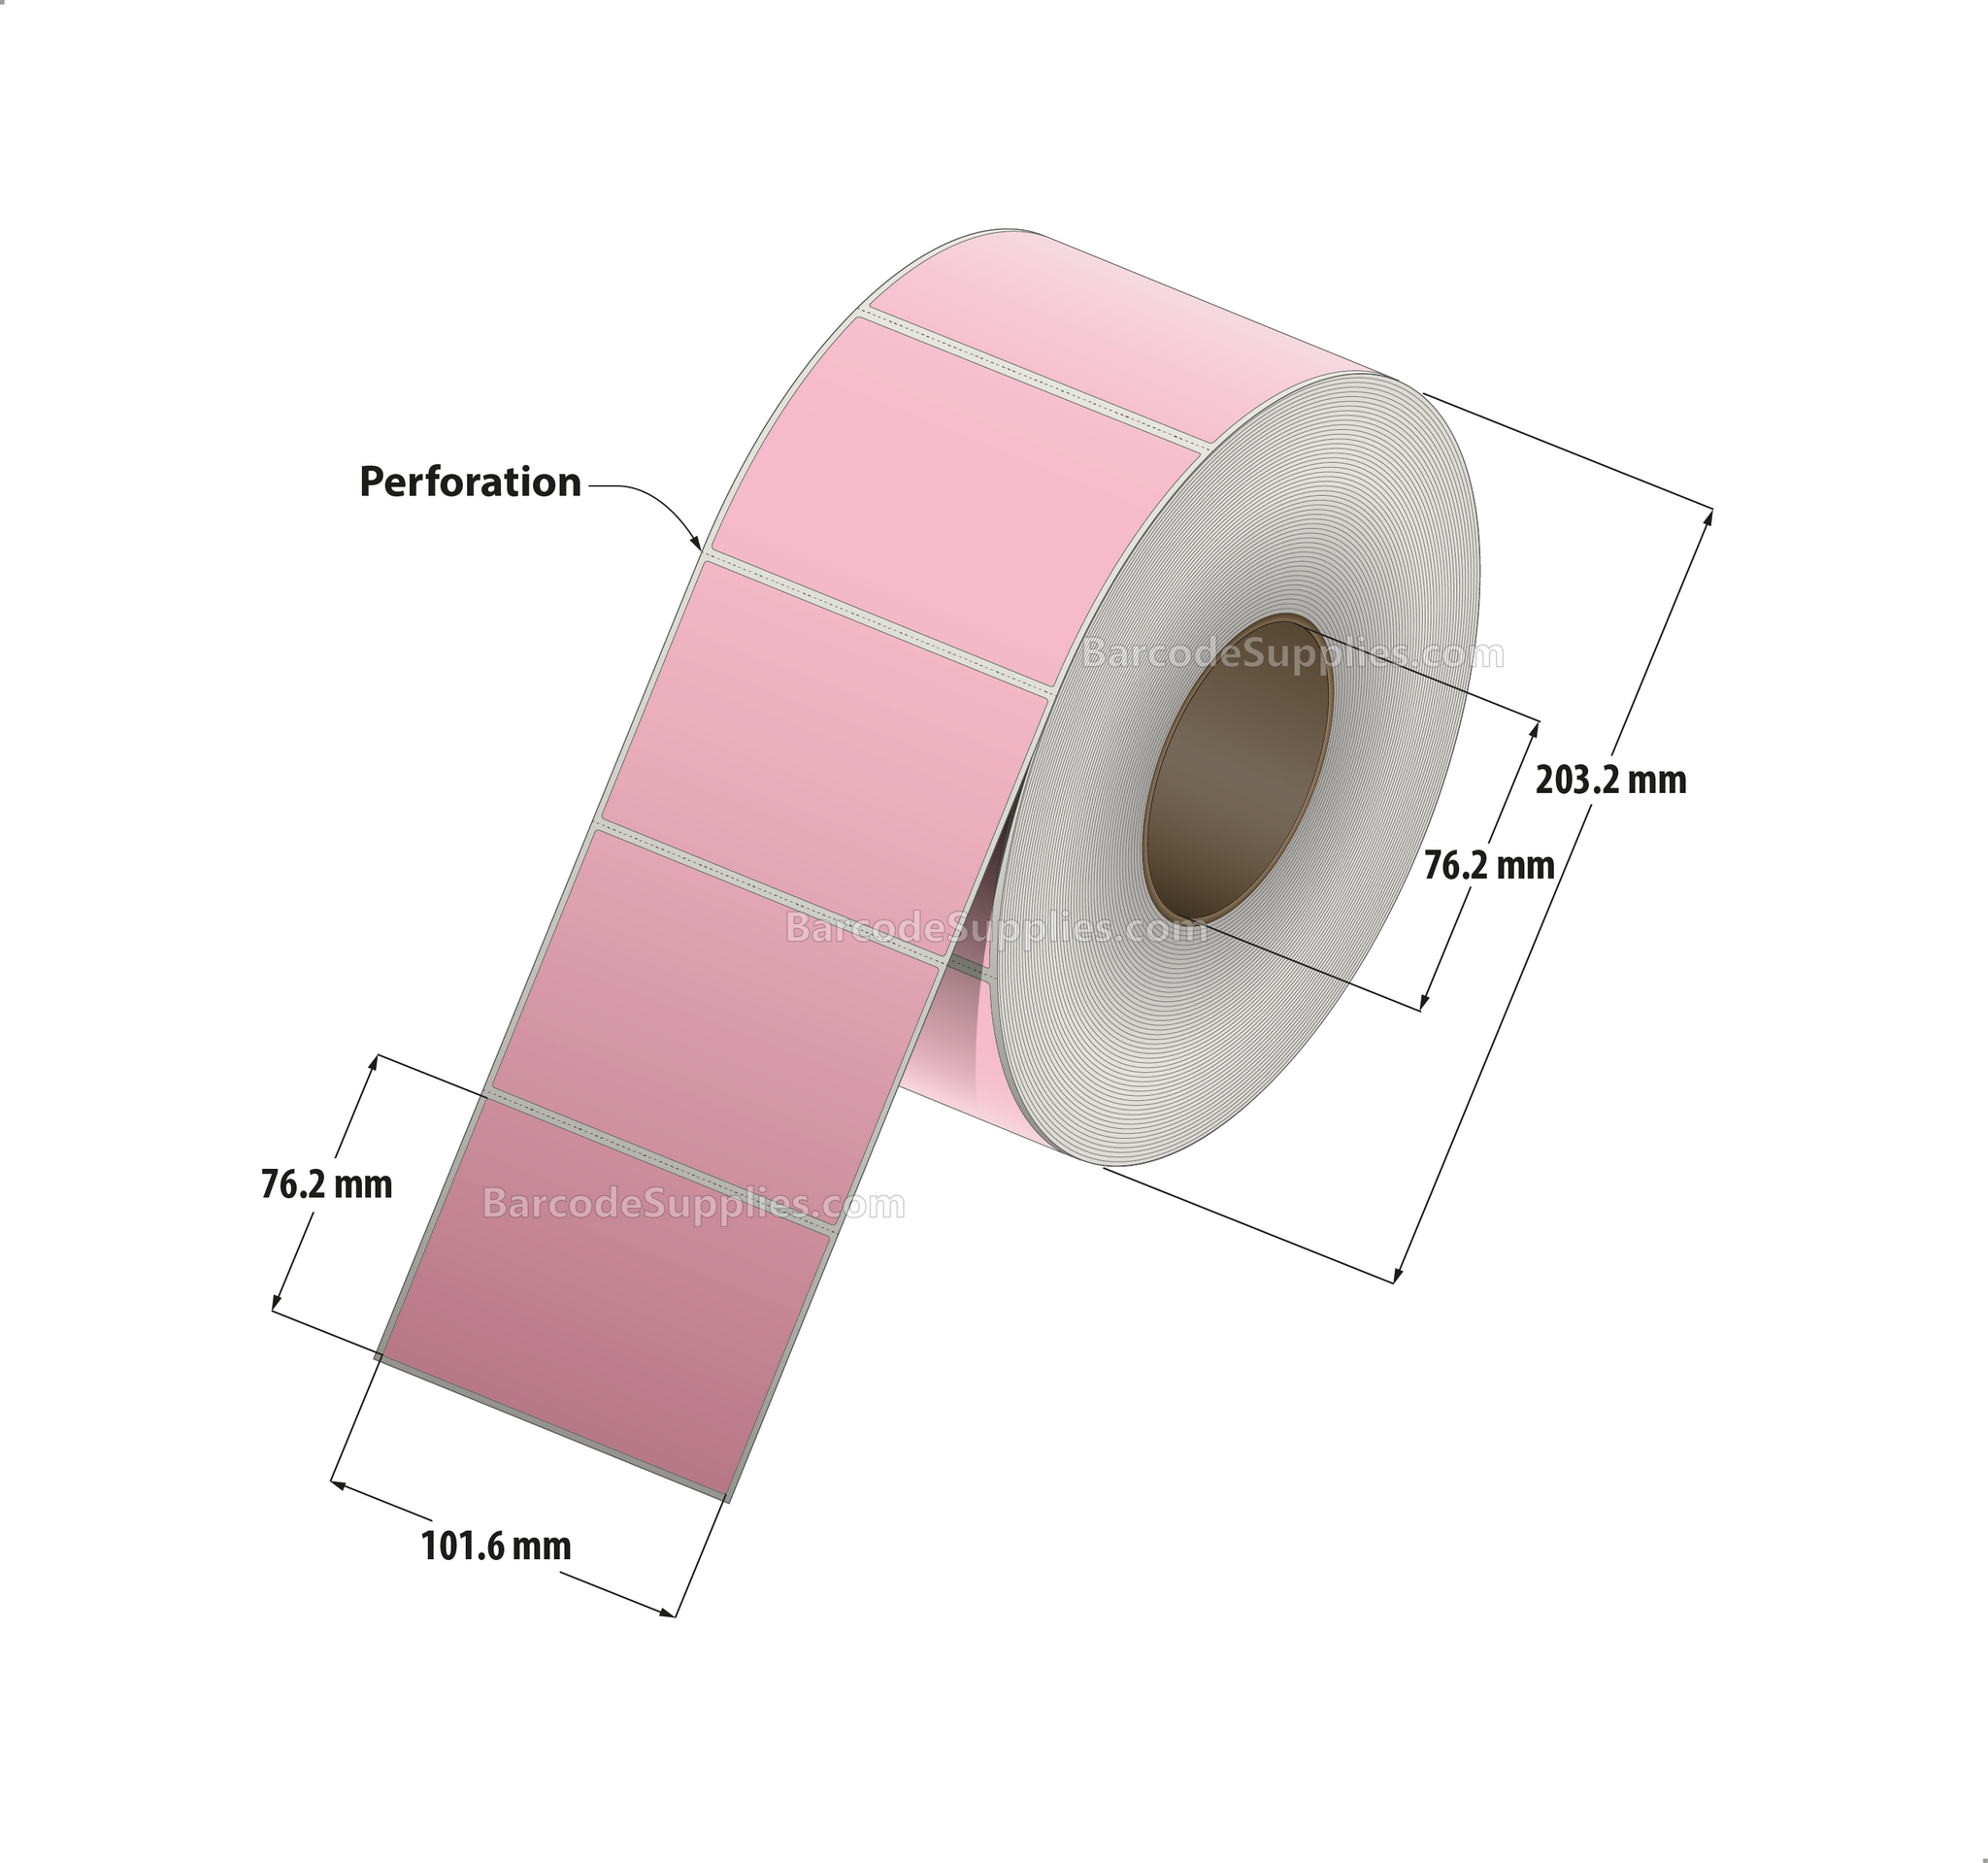 4 x 3 Thermal Transfer 196 Pink Labels With Permanent Acrylic Adhesive - Perforated - 1900 Labels Per Roll - Carton Of 4 Rolls - 7600 Labels Total - MPN: TH43-1PP